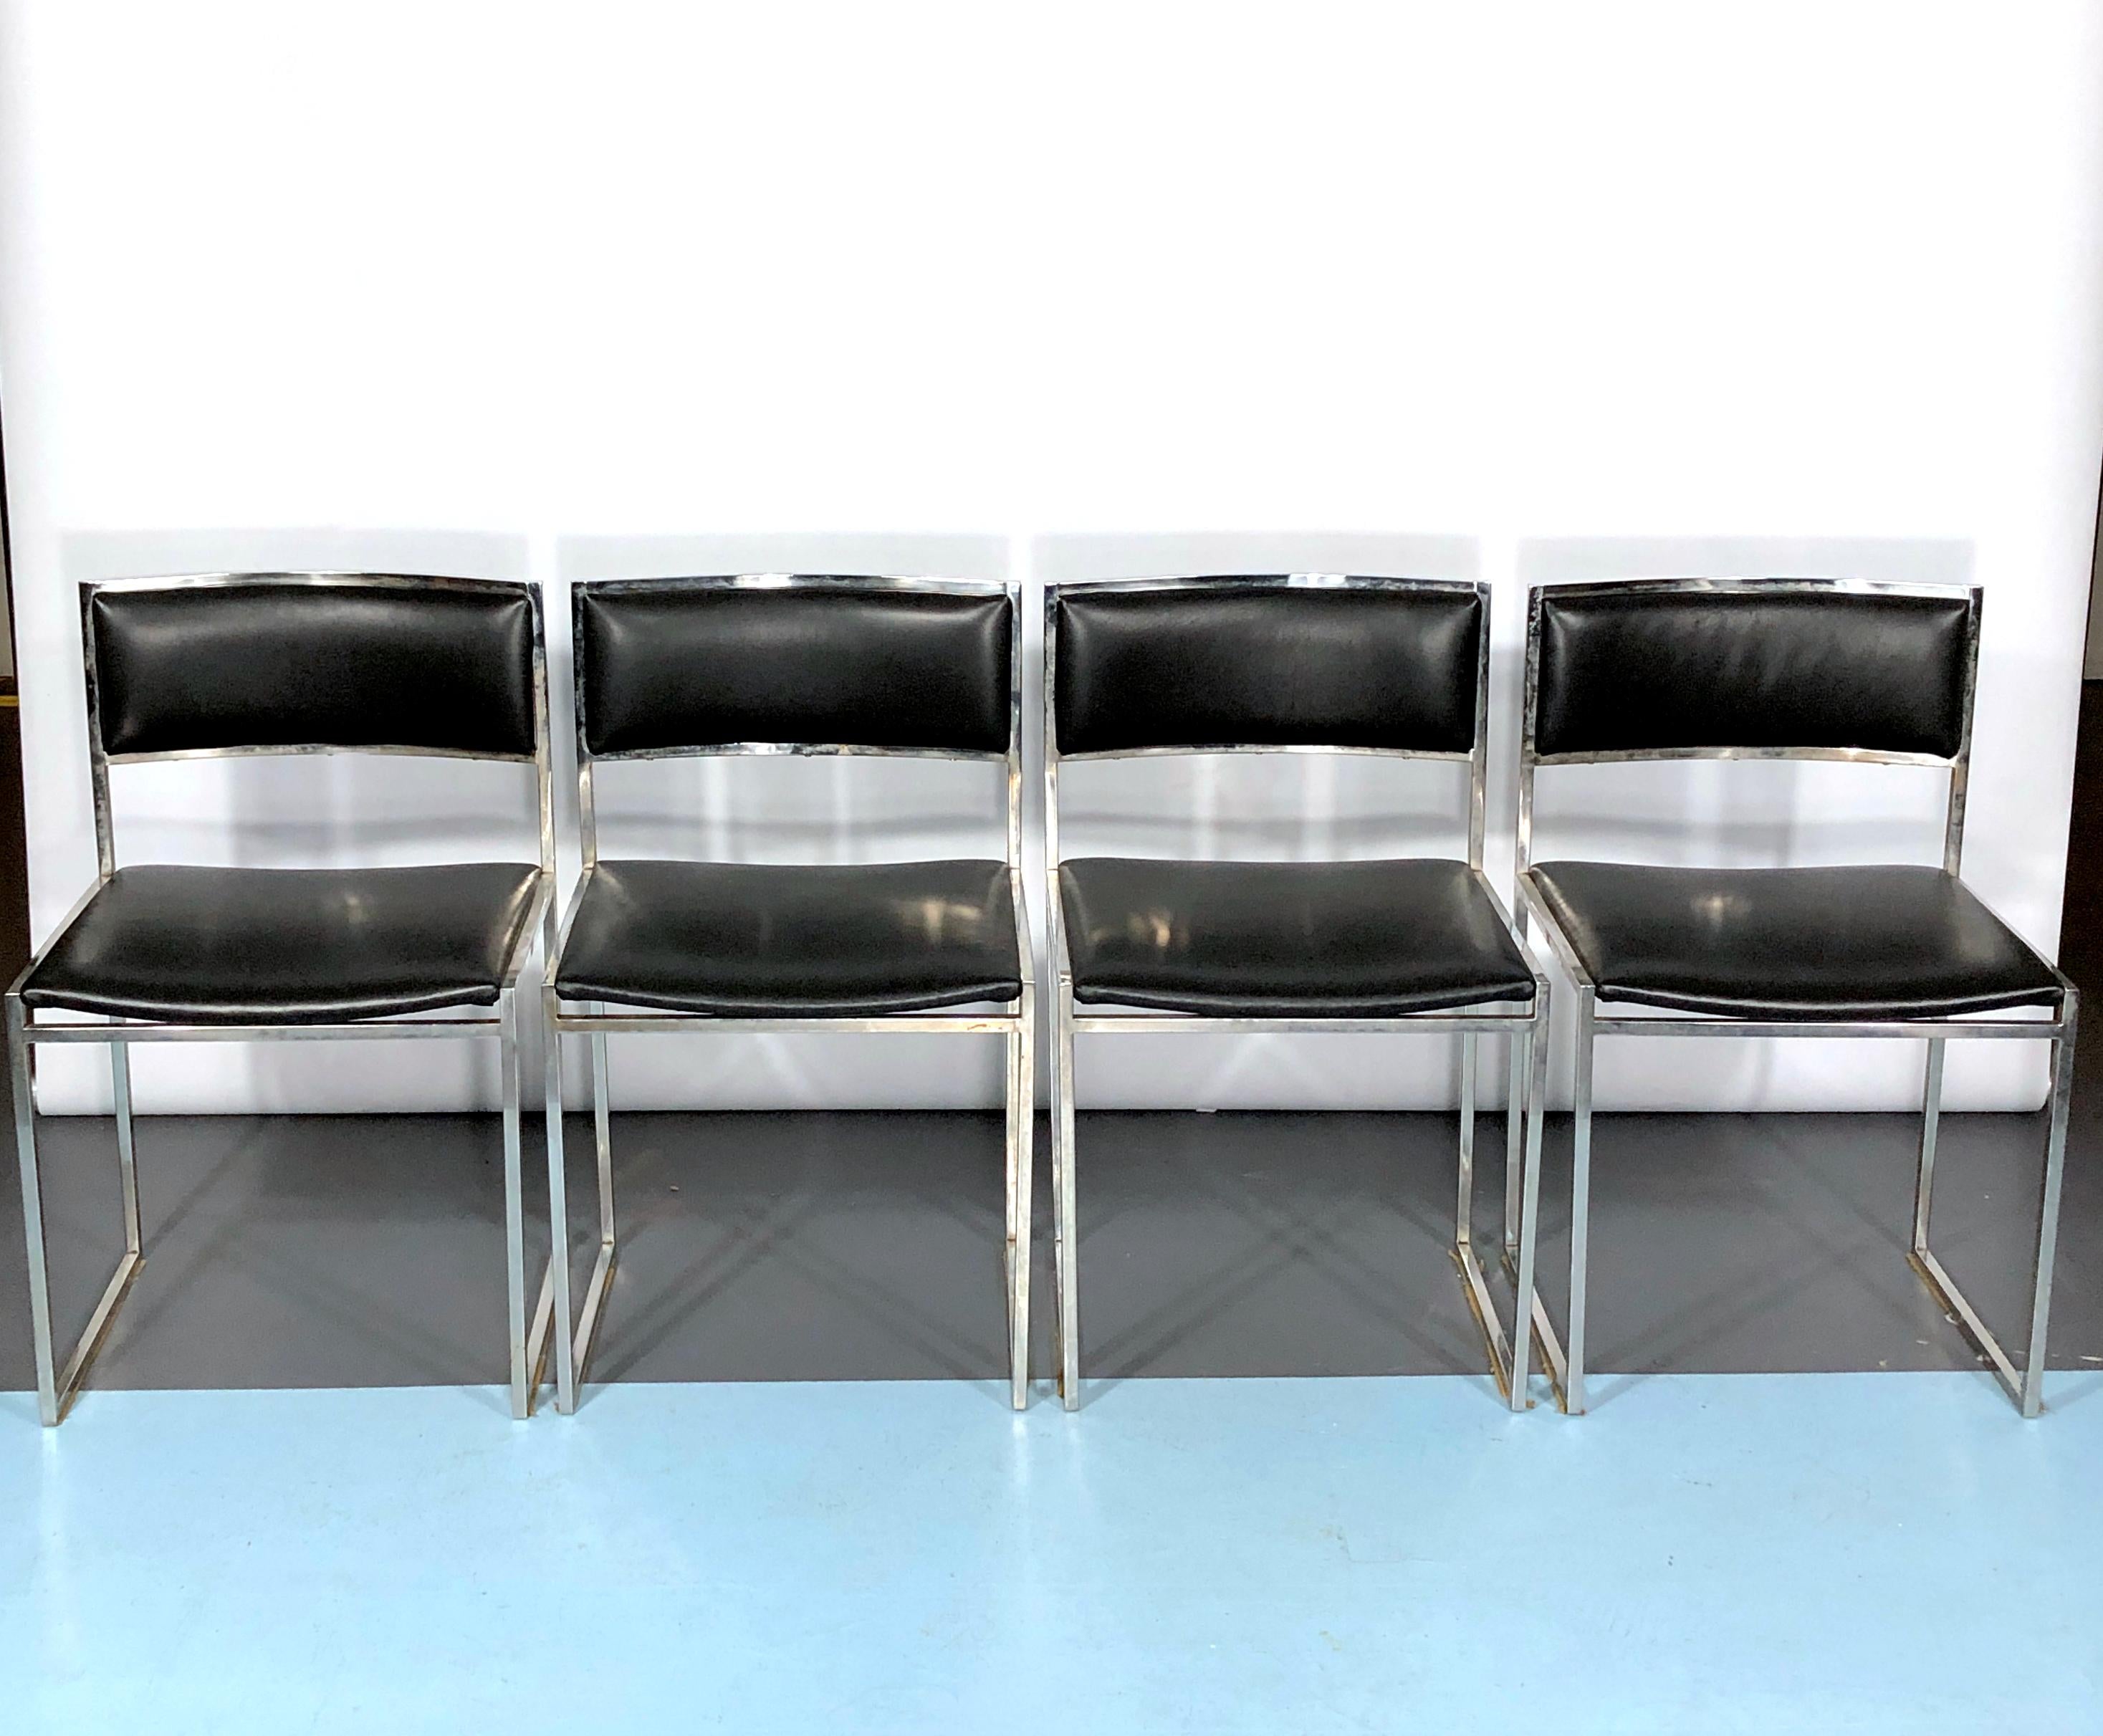 Chrome and black leather. Set of four dining chairs in excellent condition with some trace of age and use on the metal. Designed by Romeo Rega and produced in Italy during the 60s.